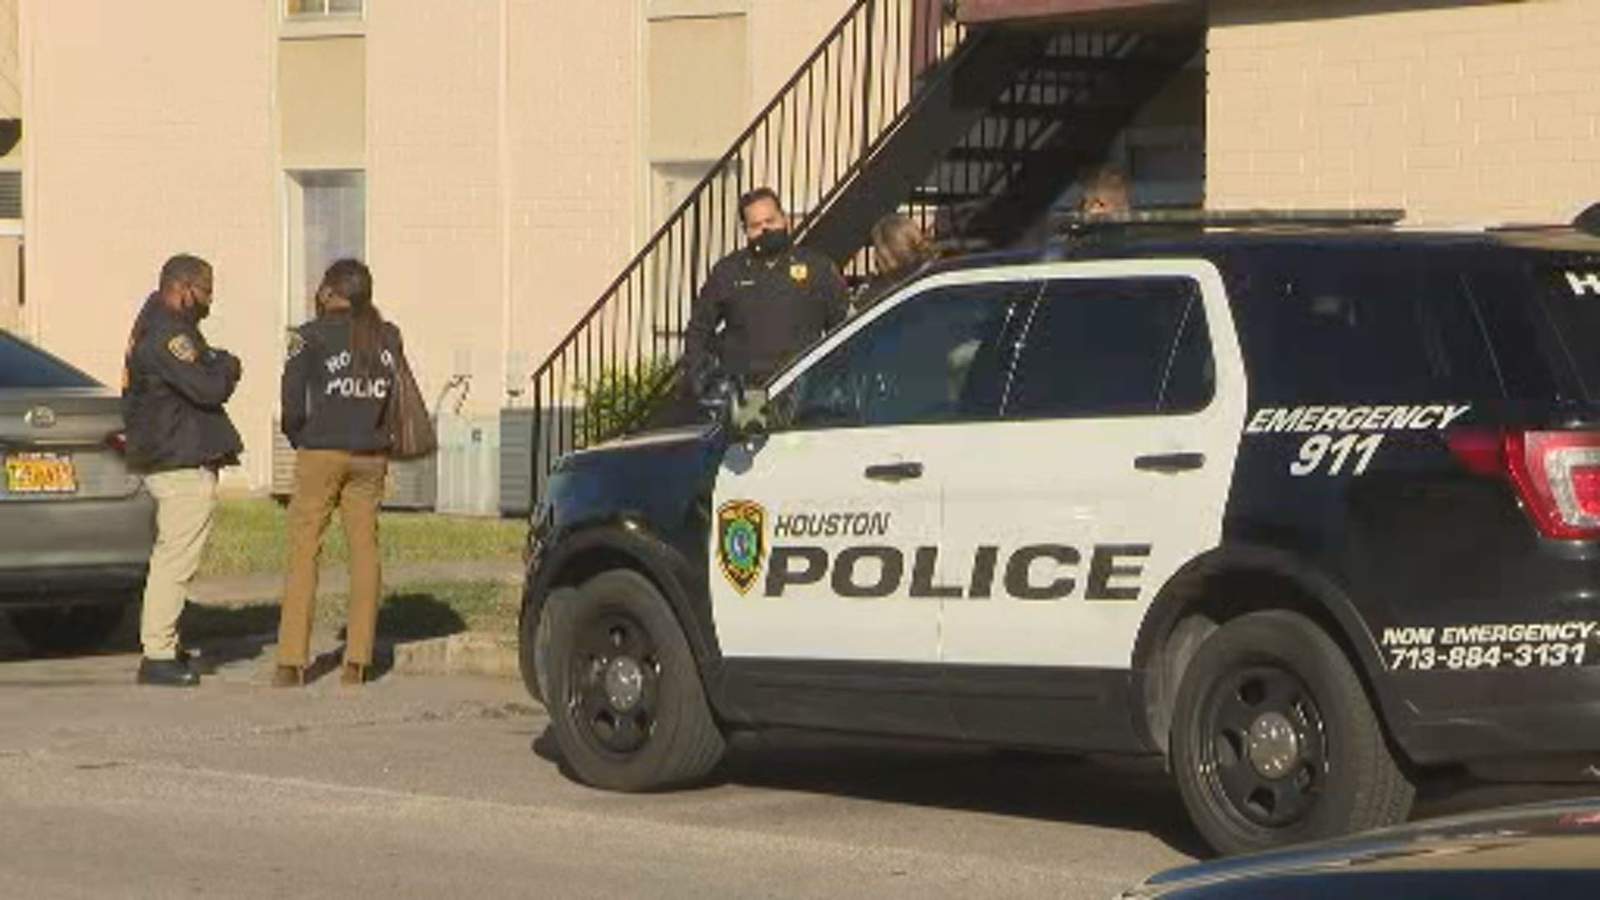 Man accused of smuggling after 6 people found inside southwest Houston apartment